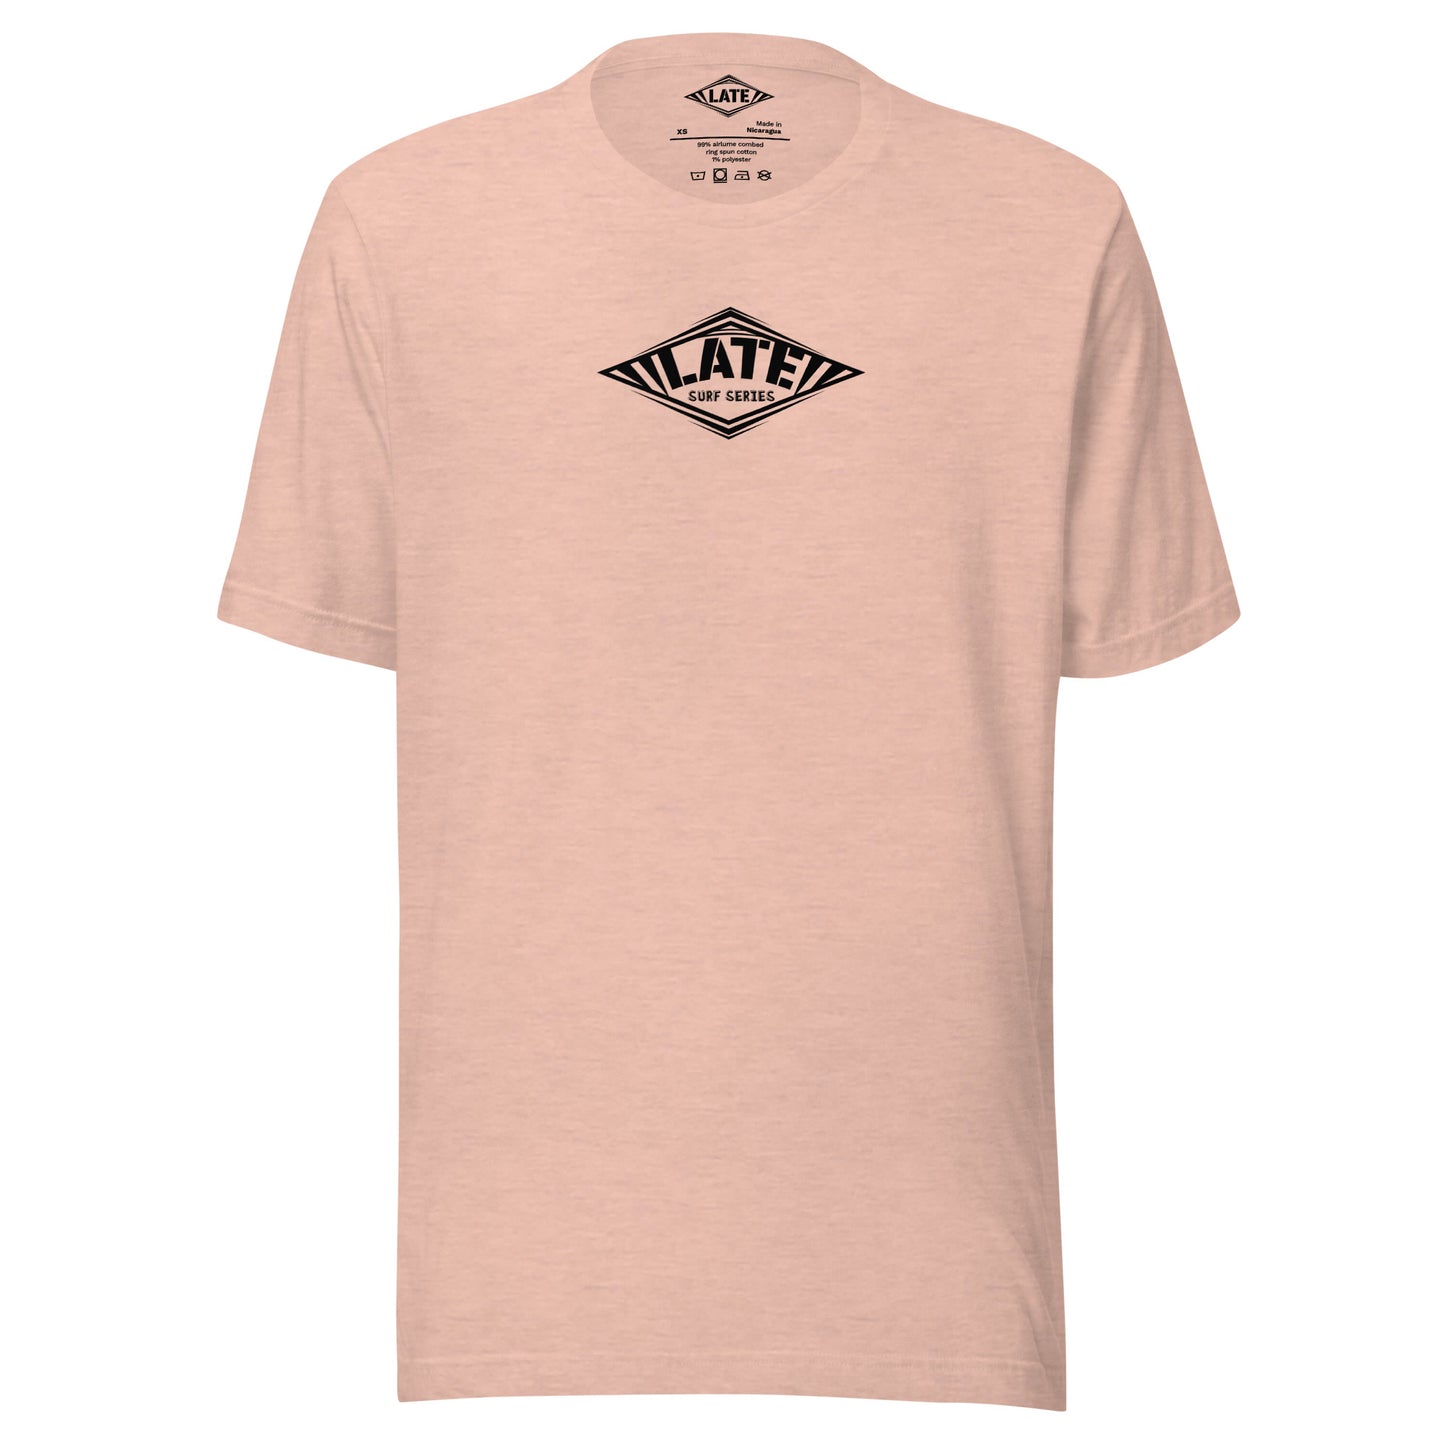 T-Shirt Take On The Elements style hurley texte surf series, et logo Late tshirt de face couleur rose